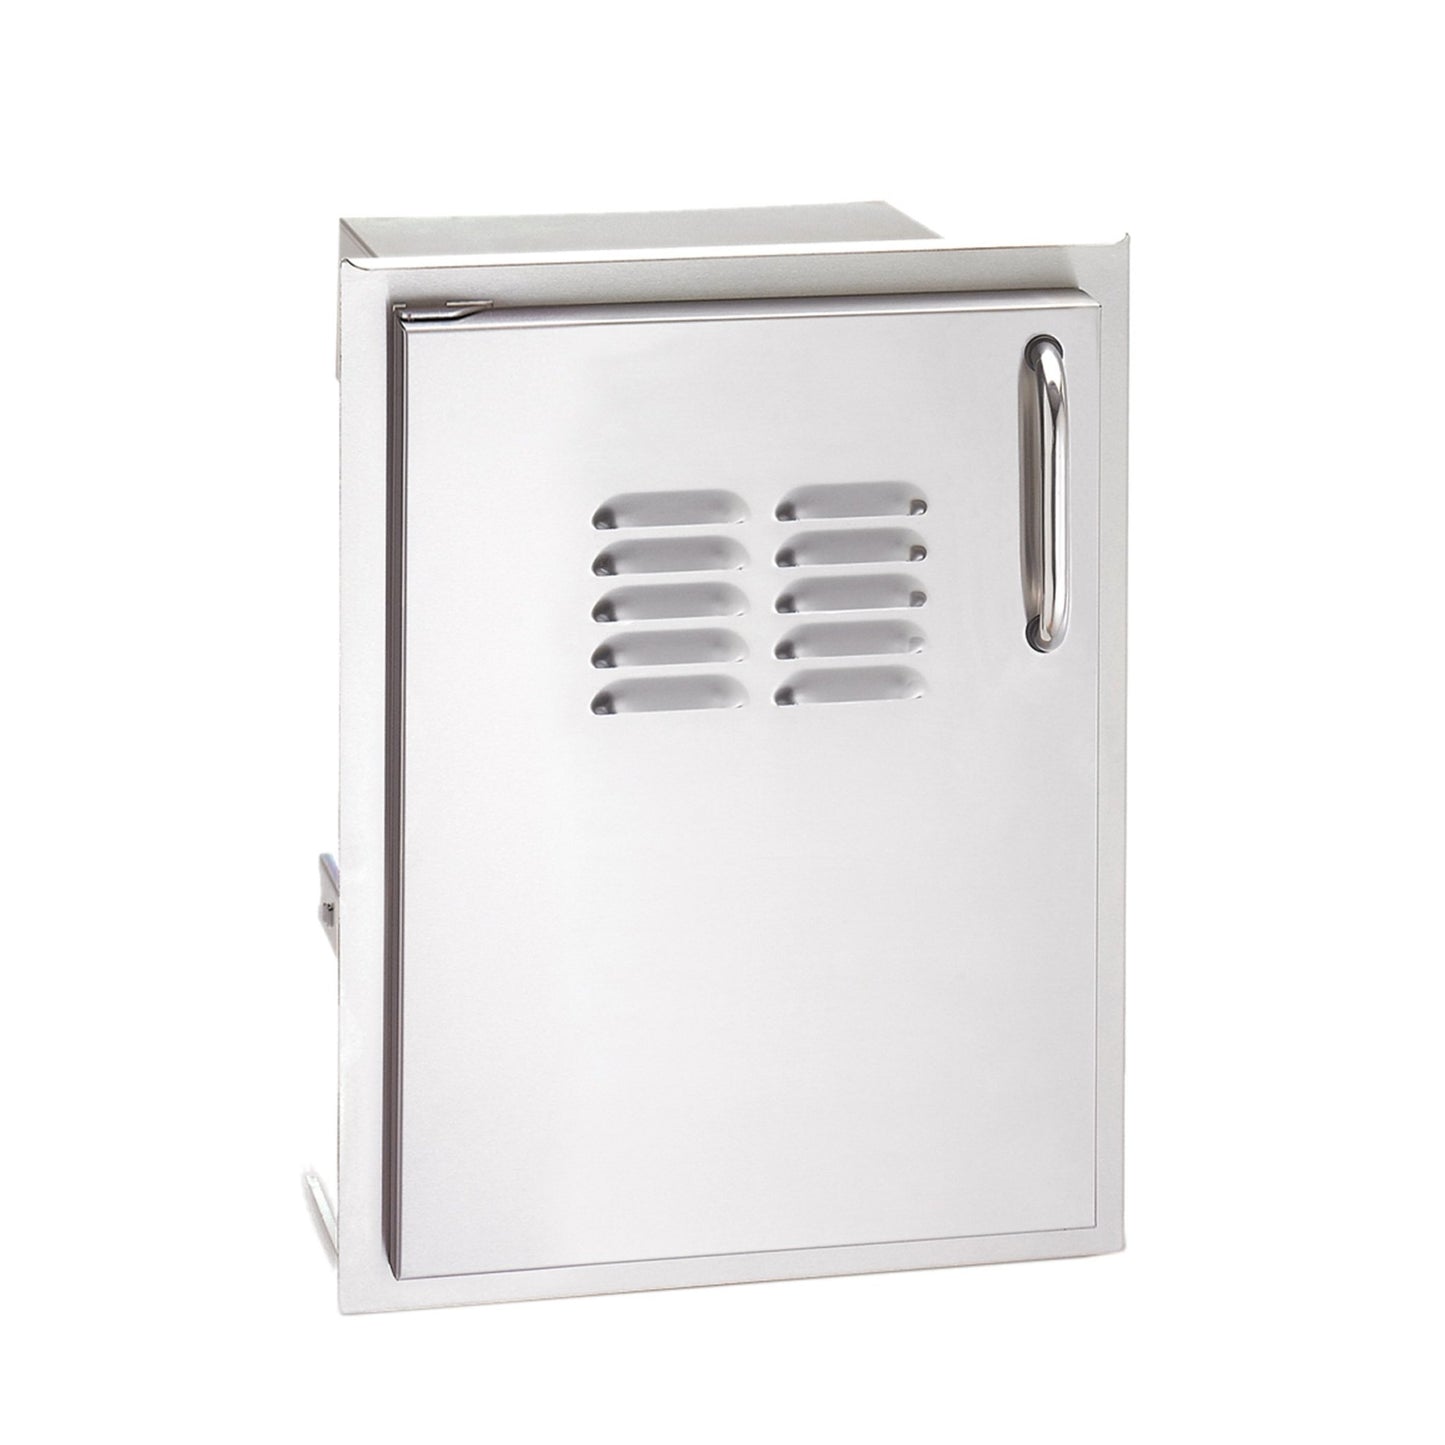 Fire Magic 33820 14-Inch Select Single Access Door w/ Tank Tray and Louvers - grillsNmore.com